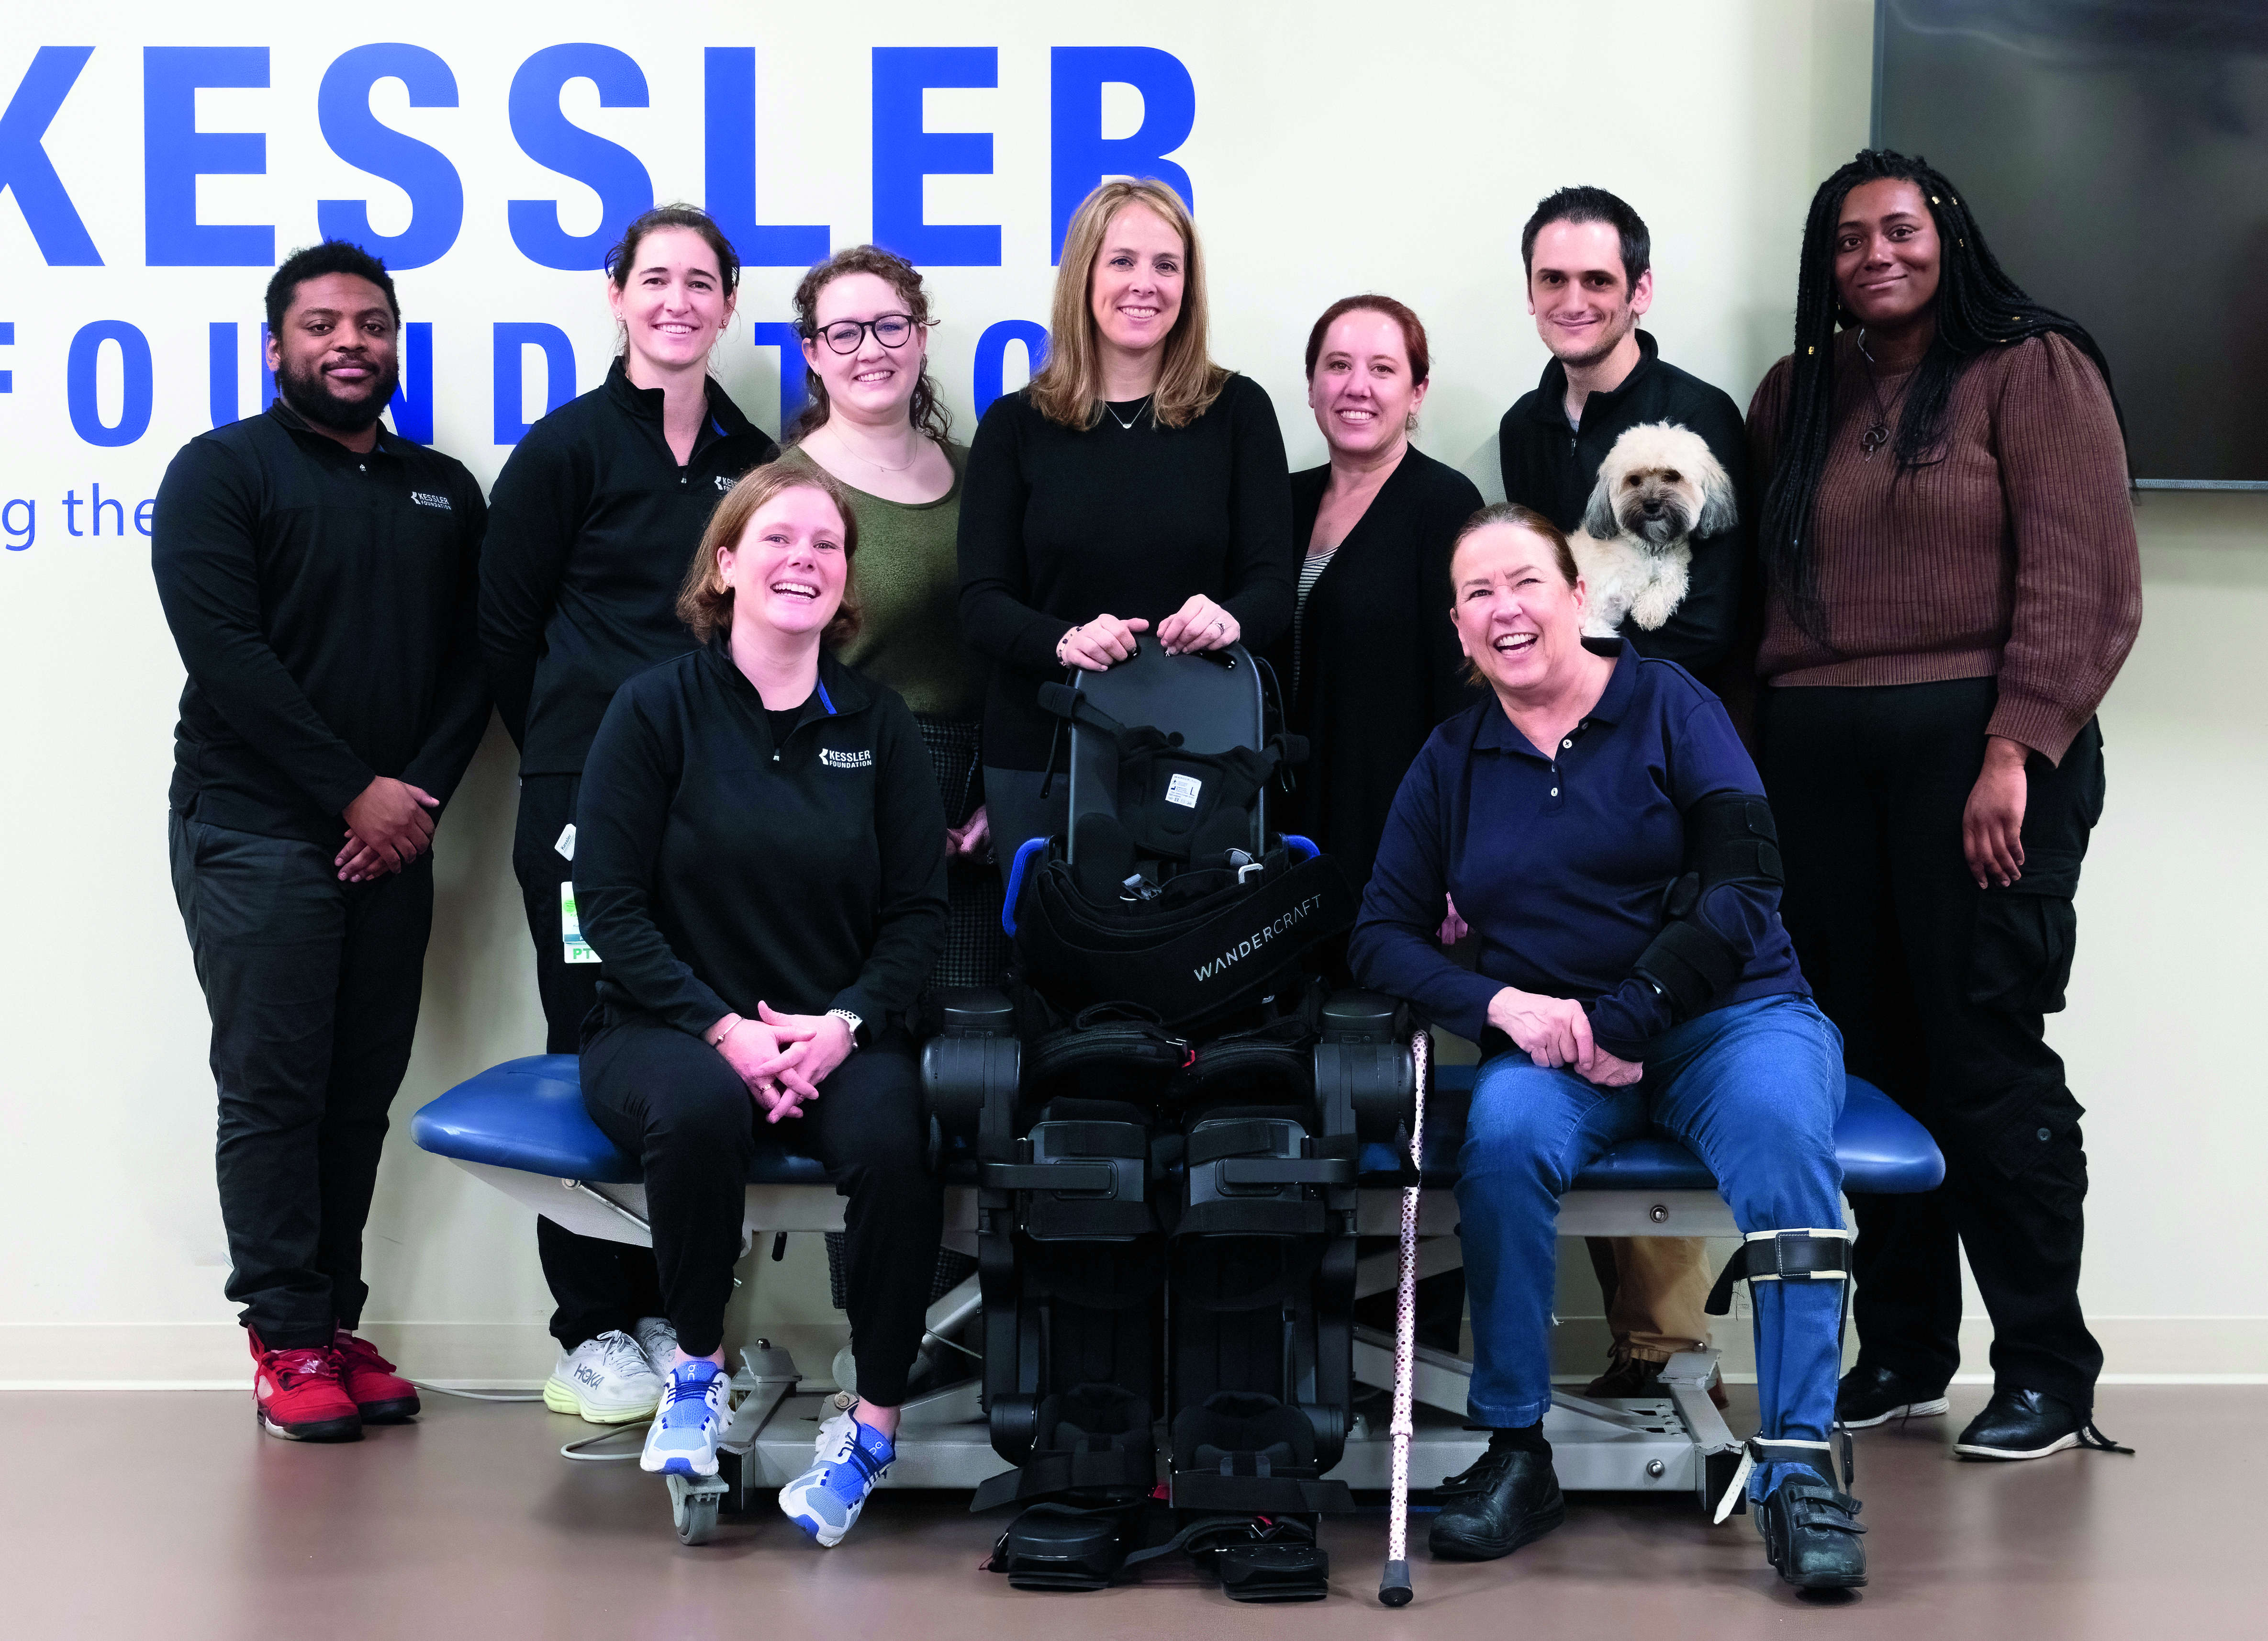 Suzanne cliff (first row, right) with her family, Dr. Karen J. Nolan (back row, center) and the robotic exoskeleton research team.